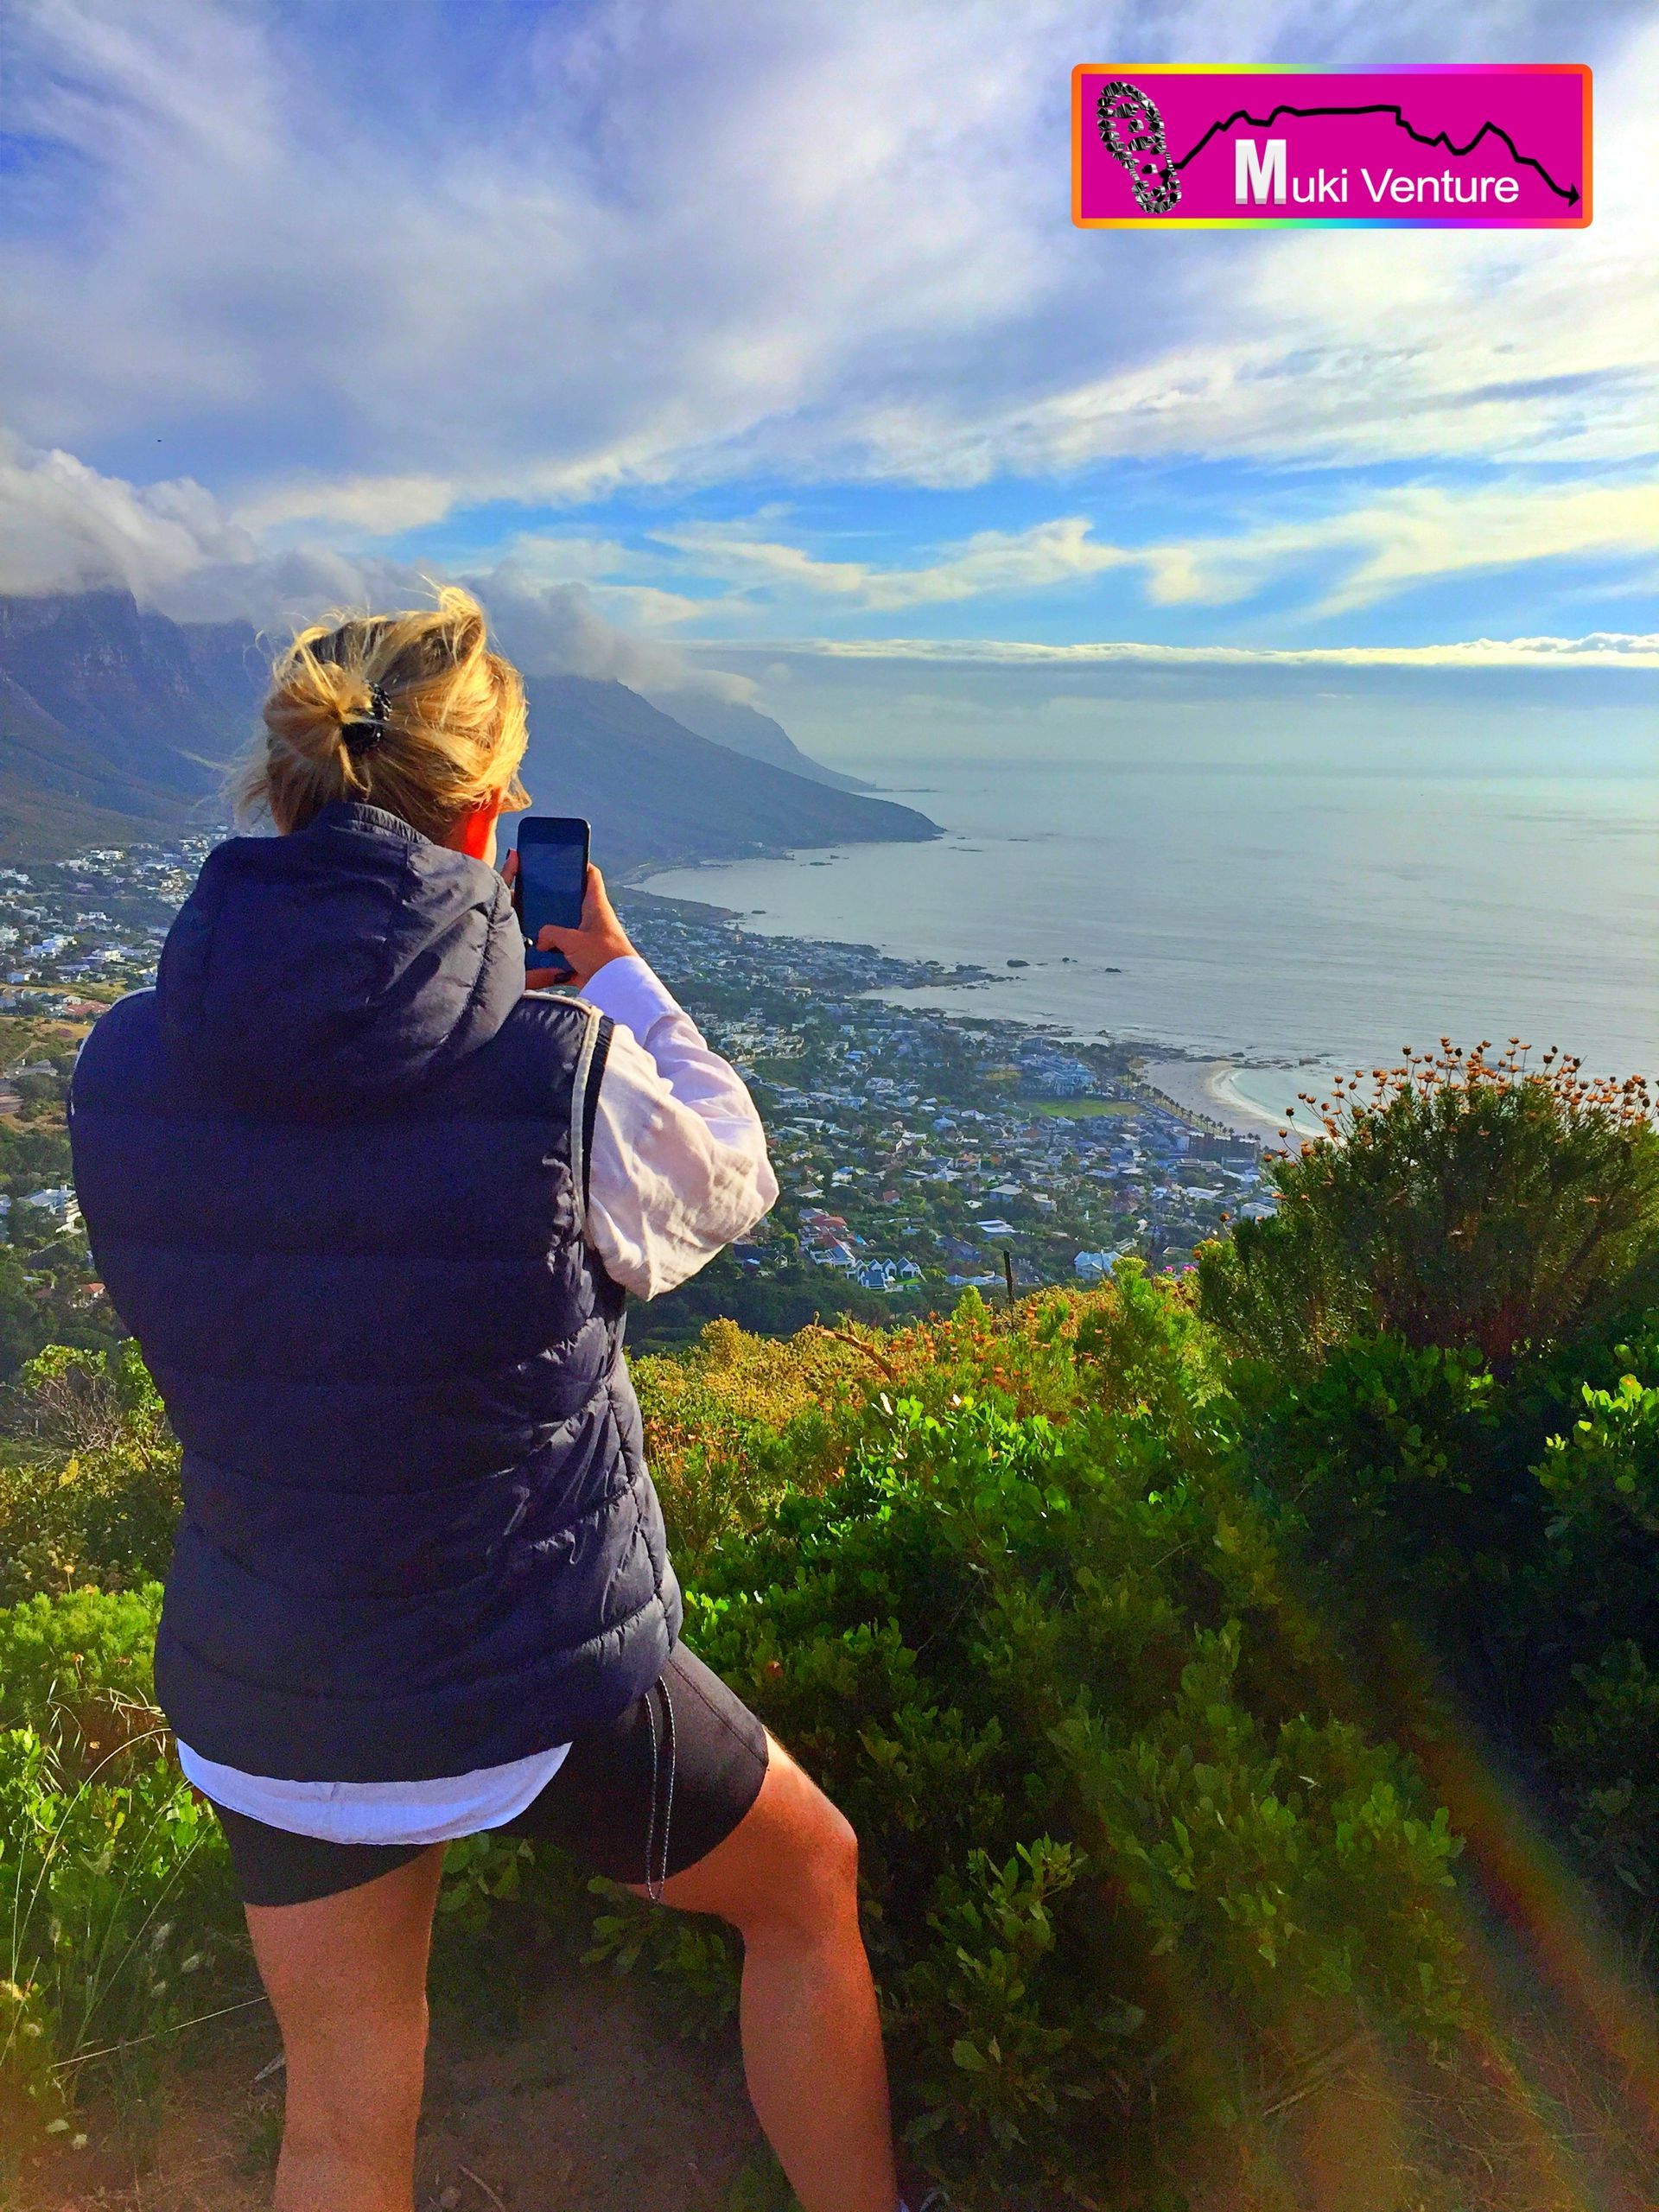 Experience the awe-inspiring beauty of Cape Town's iconic landmarks, Table Mountain and Lions Head, with our Guided Sunrise or Sunset Hike. Join Muki Venture and embark on an unforgettable adventure as we ascend these majestic peaks, taking in panoramic views that will leave you breathless.  Our experienced guides will lead you on a thrilling journey up Lions Head, an iconic mountain that dominates the city's skyline. As you hike along the well-maintained trails, you'll feel the excitement building with each step. Witness the beauty of the vibrant city below as it slowly awakens or basks in the warm glow of the setting sun.  As you reach the summit, the rewards will be ample. Marvel at the breathtaking views of Cape Town, Table Mountain, and the surrounding Atlantic coastline. Absorb the peacefulness of the moment as the city begins to come alive with the dawn of a new day or revel in the tranquility of the diminishing light as the sun descends below the horizon.  Capture stunning photos against this picturesque backdrop, immortalizing your memories forever. Our knowledgeable guides will gladly share interesting facts and stories about these landmarks, adding depth to your experience and enhancing your appreciation for their natural wonders.  The Guided Sunrise or Sunset Lions Head Hike with Muki Venture is suitable for fitness enthusiasts of all levels. Whether you're embarking on a solo adventure or seeking a unique outing with friends or family, our tour ensures safety, camaraderie, and a story to tell for a lifetime.  Don't miss the opportunity to witness the magic that unfolds over Cape Town during these golden hours. Book your guided hike with Muki Venture today and let nature's grandeur ignite your spirit.